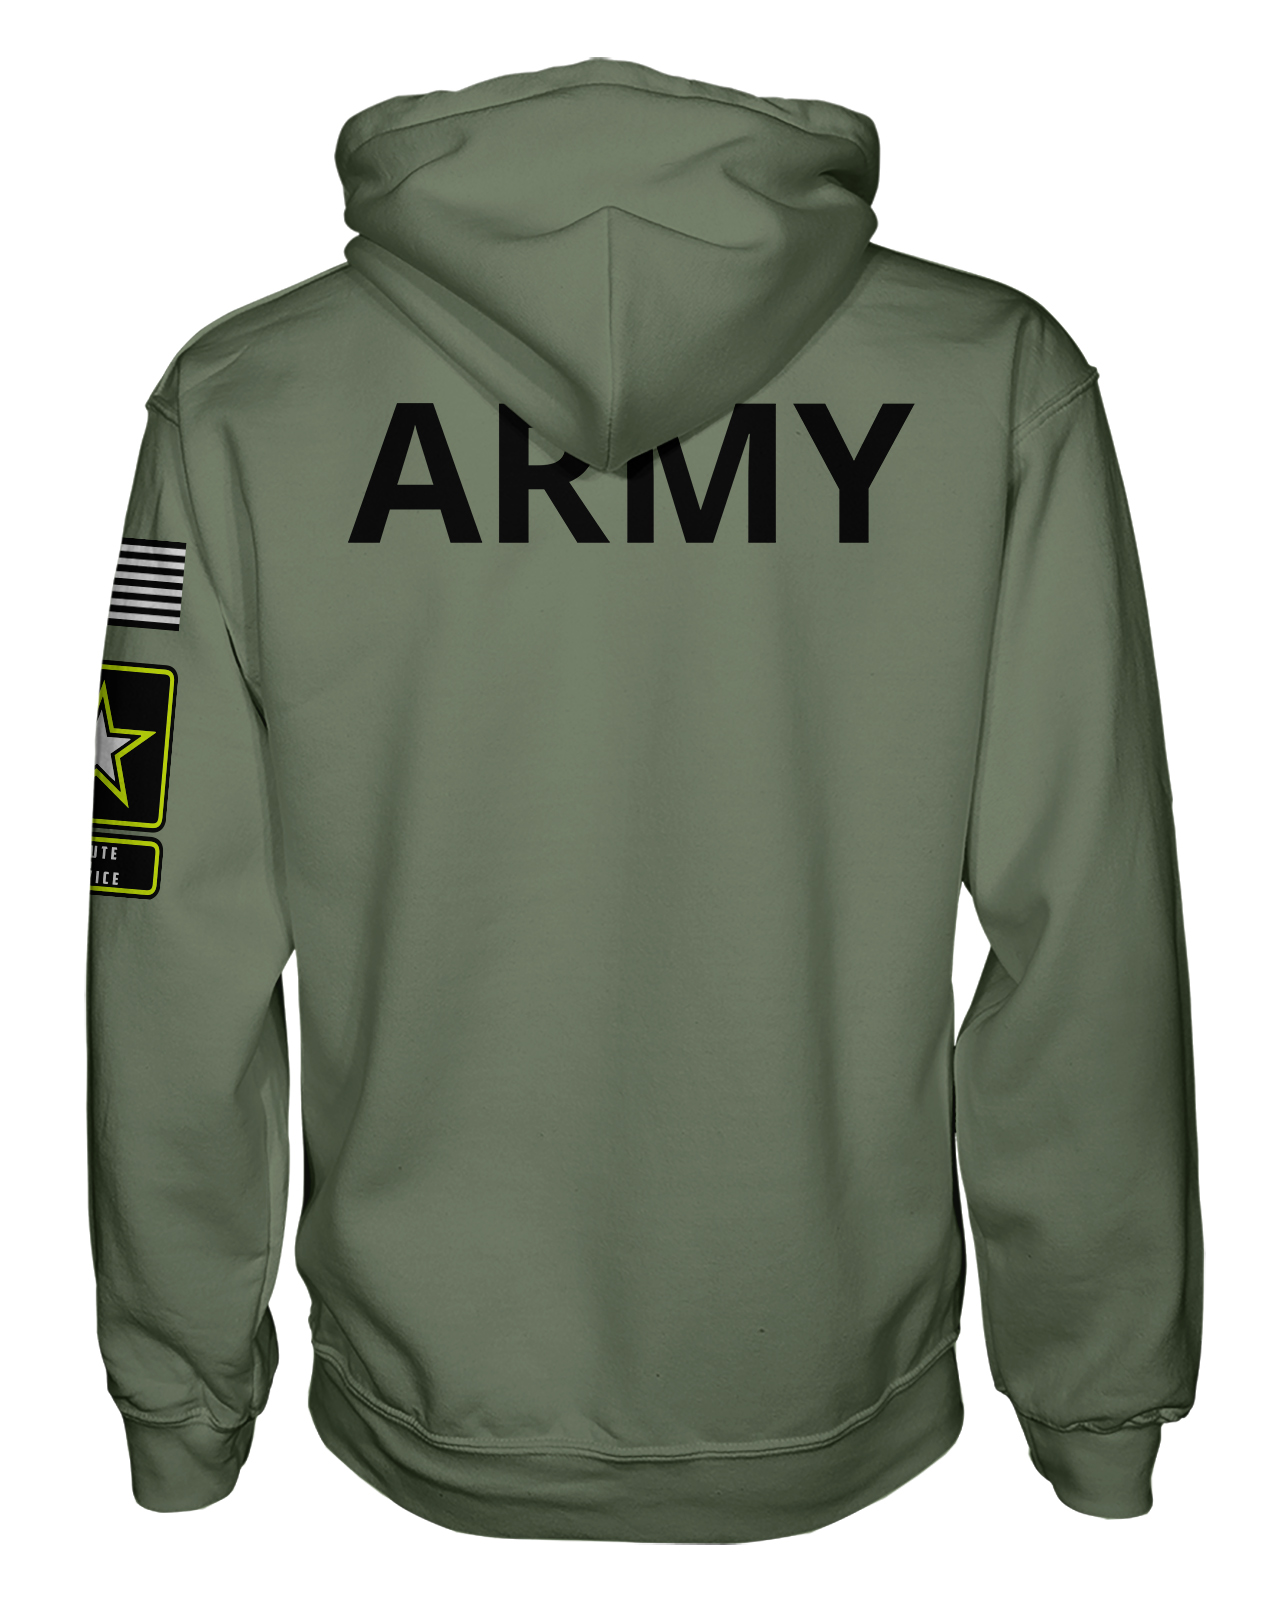 Patriot Sports  ARMY Pullover Hoodie  Back  View  with HD  Text "ARMY". 